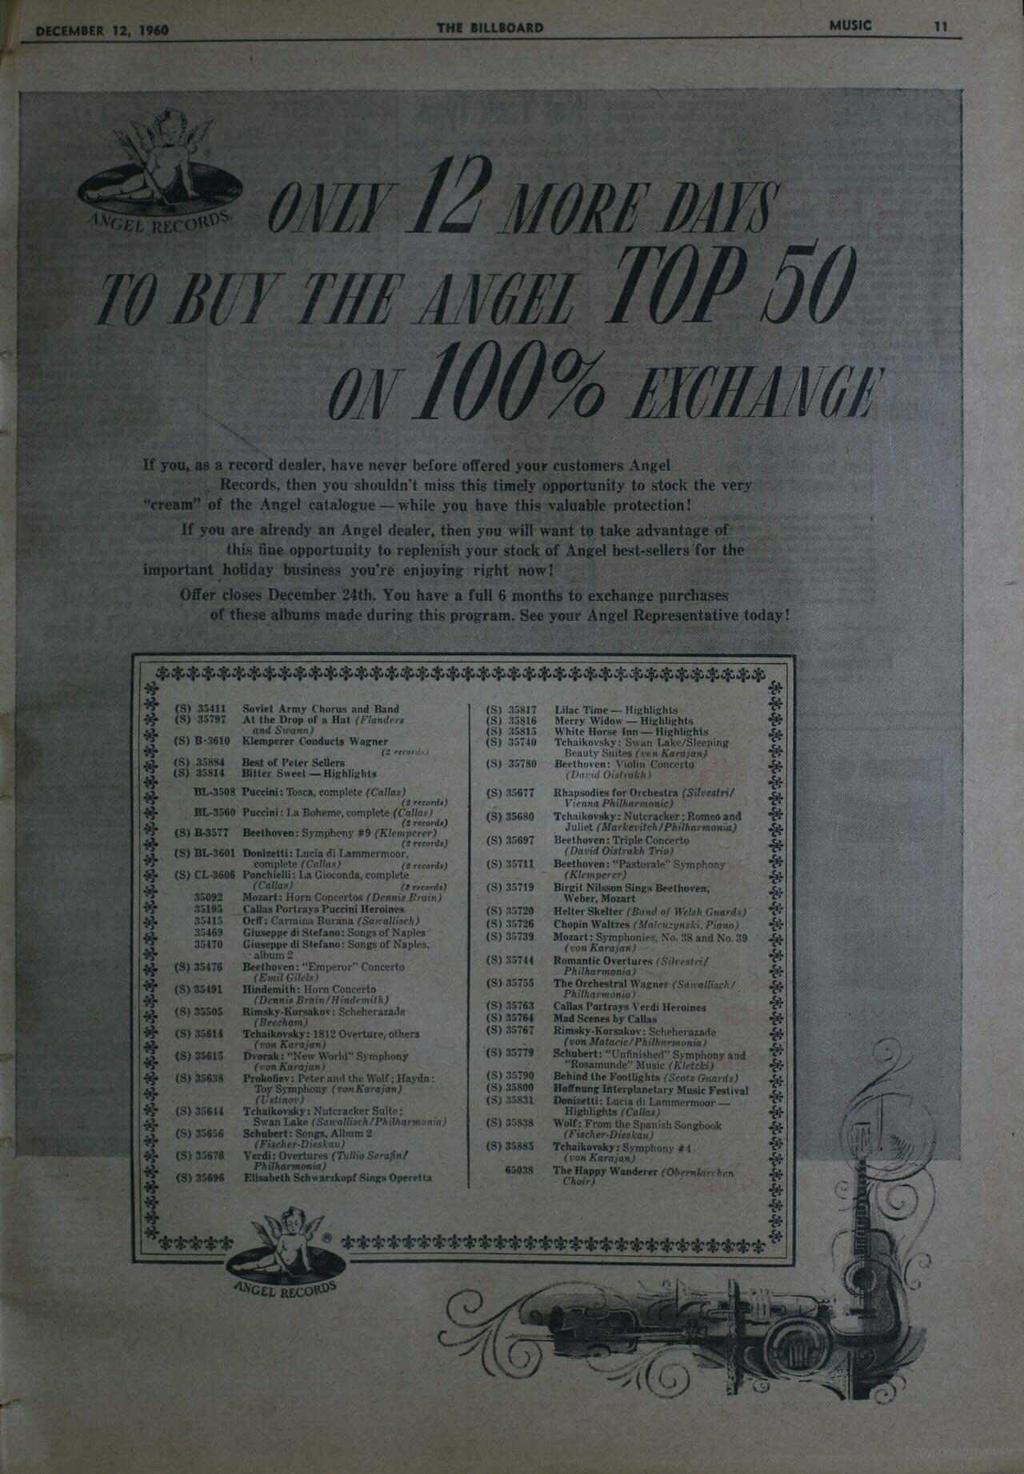 DECEMBER 12, 1960 THE BILLBOARD MUSIC 11 oiwy12 YON ki l ; l i t1/62z TOP 50 av 100% ficff41161 If you, as a record dealer. have never before offered your customers Angel Records.